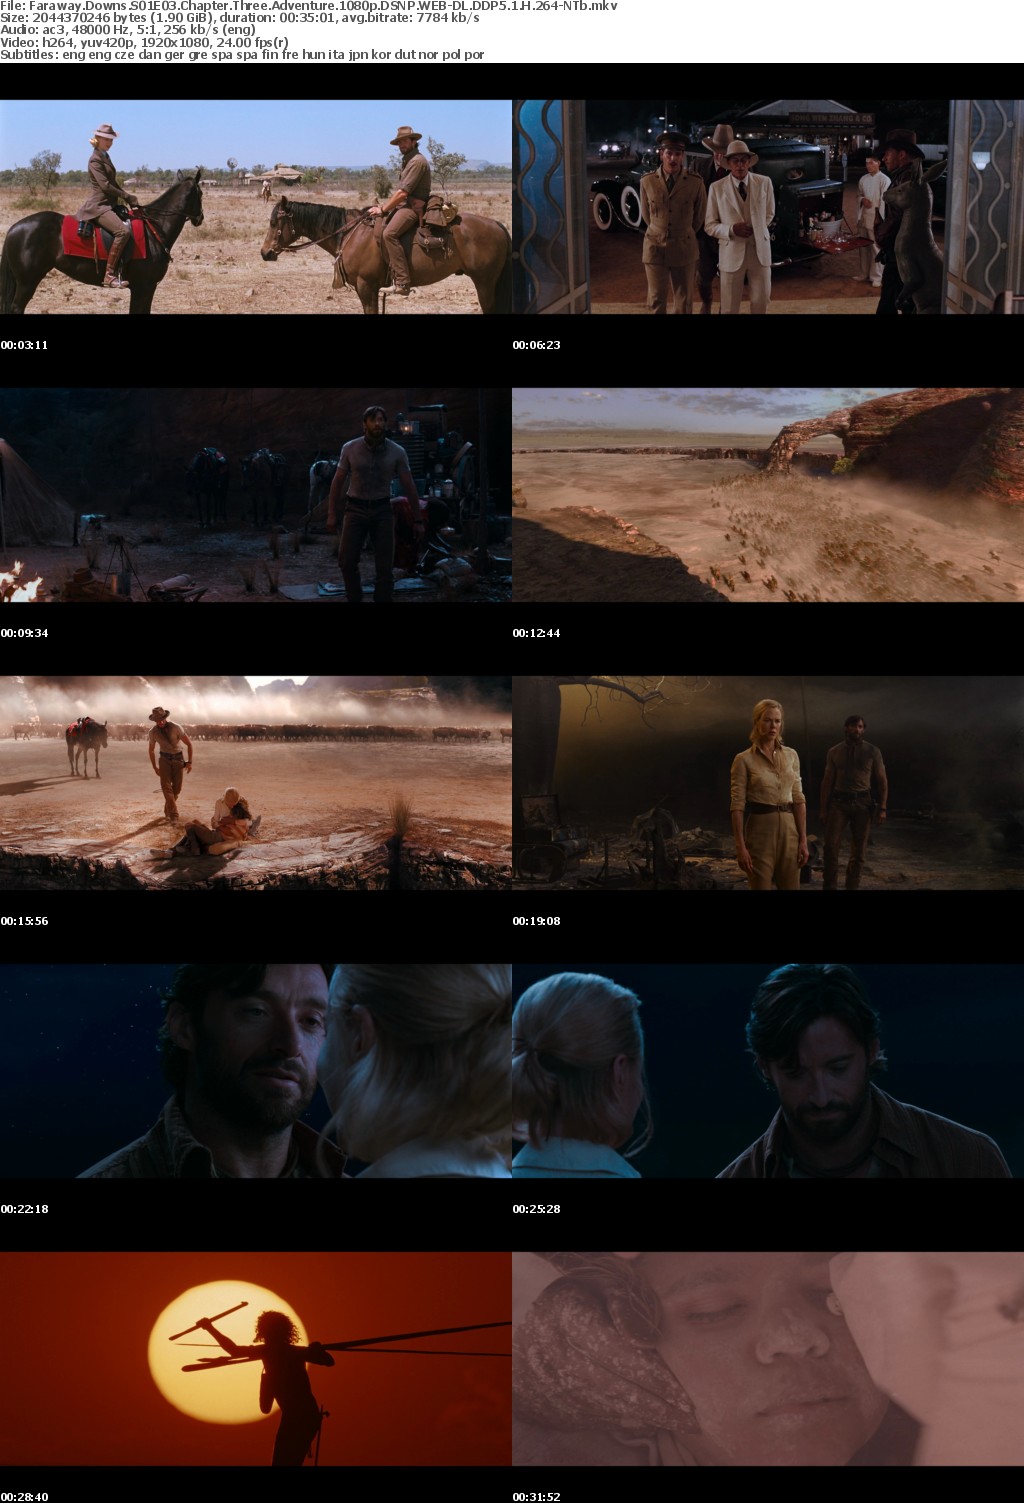 Faraway Downs S01E03 Chapter Three Adventure 1080p DSNP WEB-DL DDP5 1 H 264-NTb